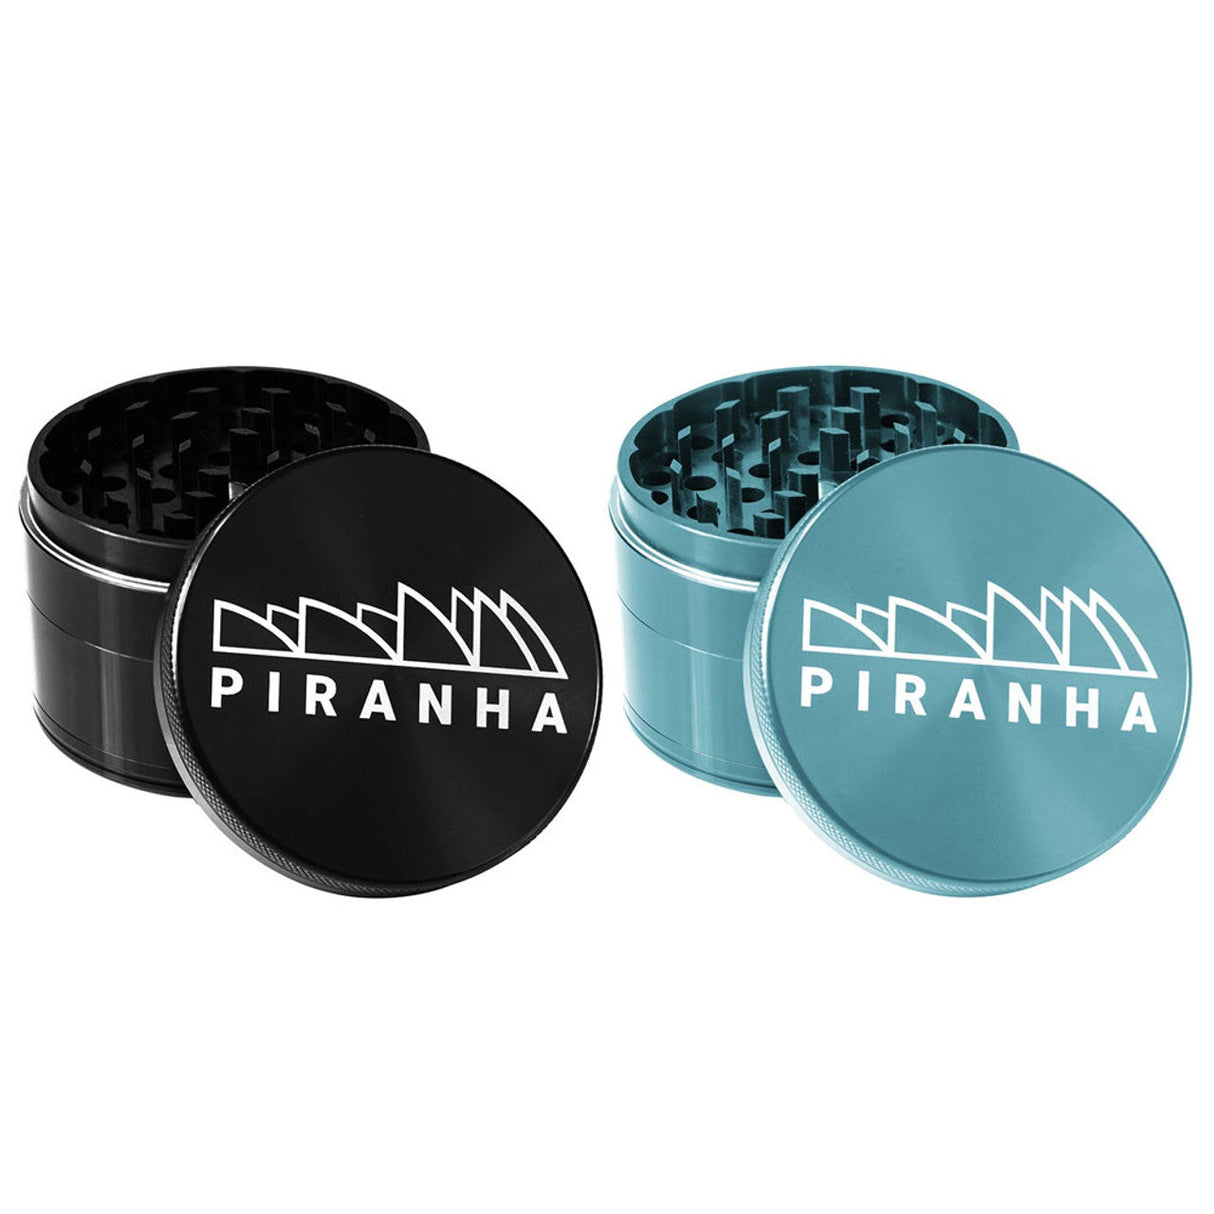 Piranha 4 Piece 3.5" Aluminum Grinders in Black and Teal - Front View